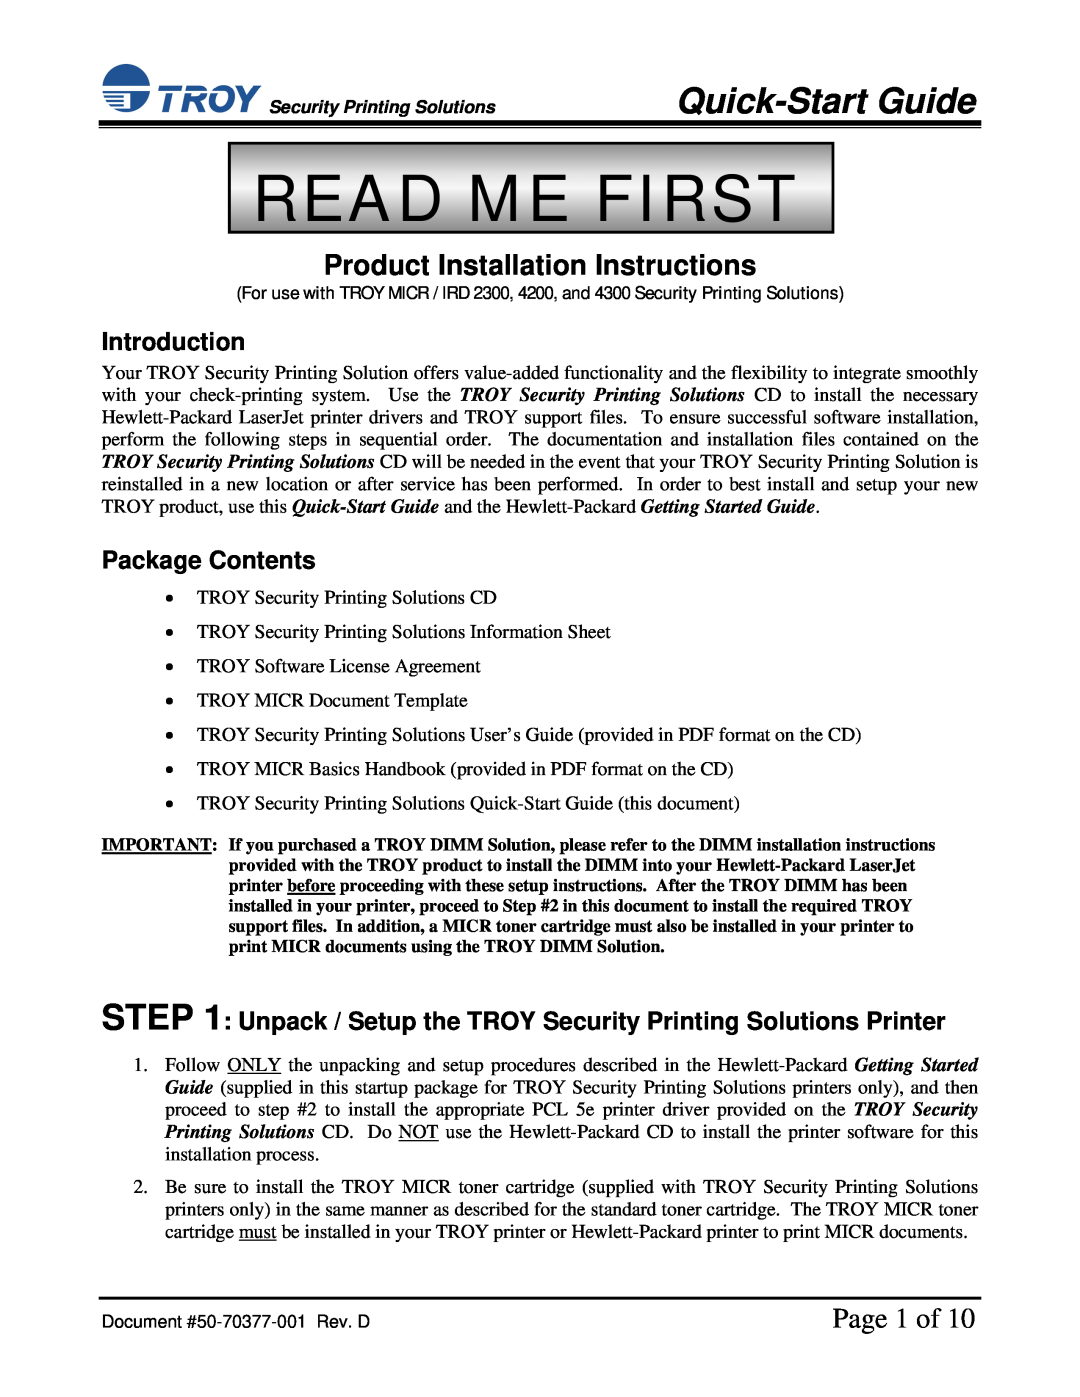 TROY Group IRD 4200 installation instructions Quick-Start Guide, Page 1 of, Introduction, Package Contents, Read Me First 